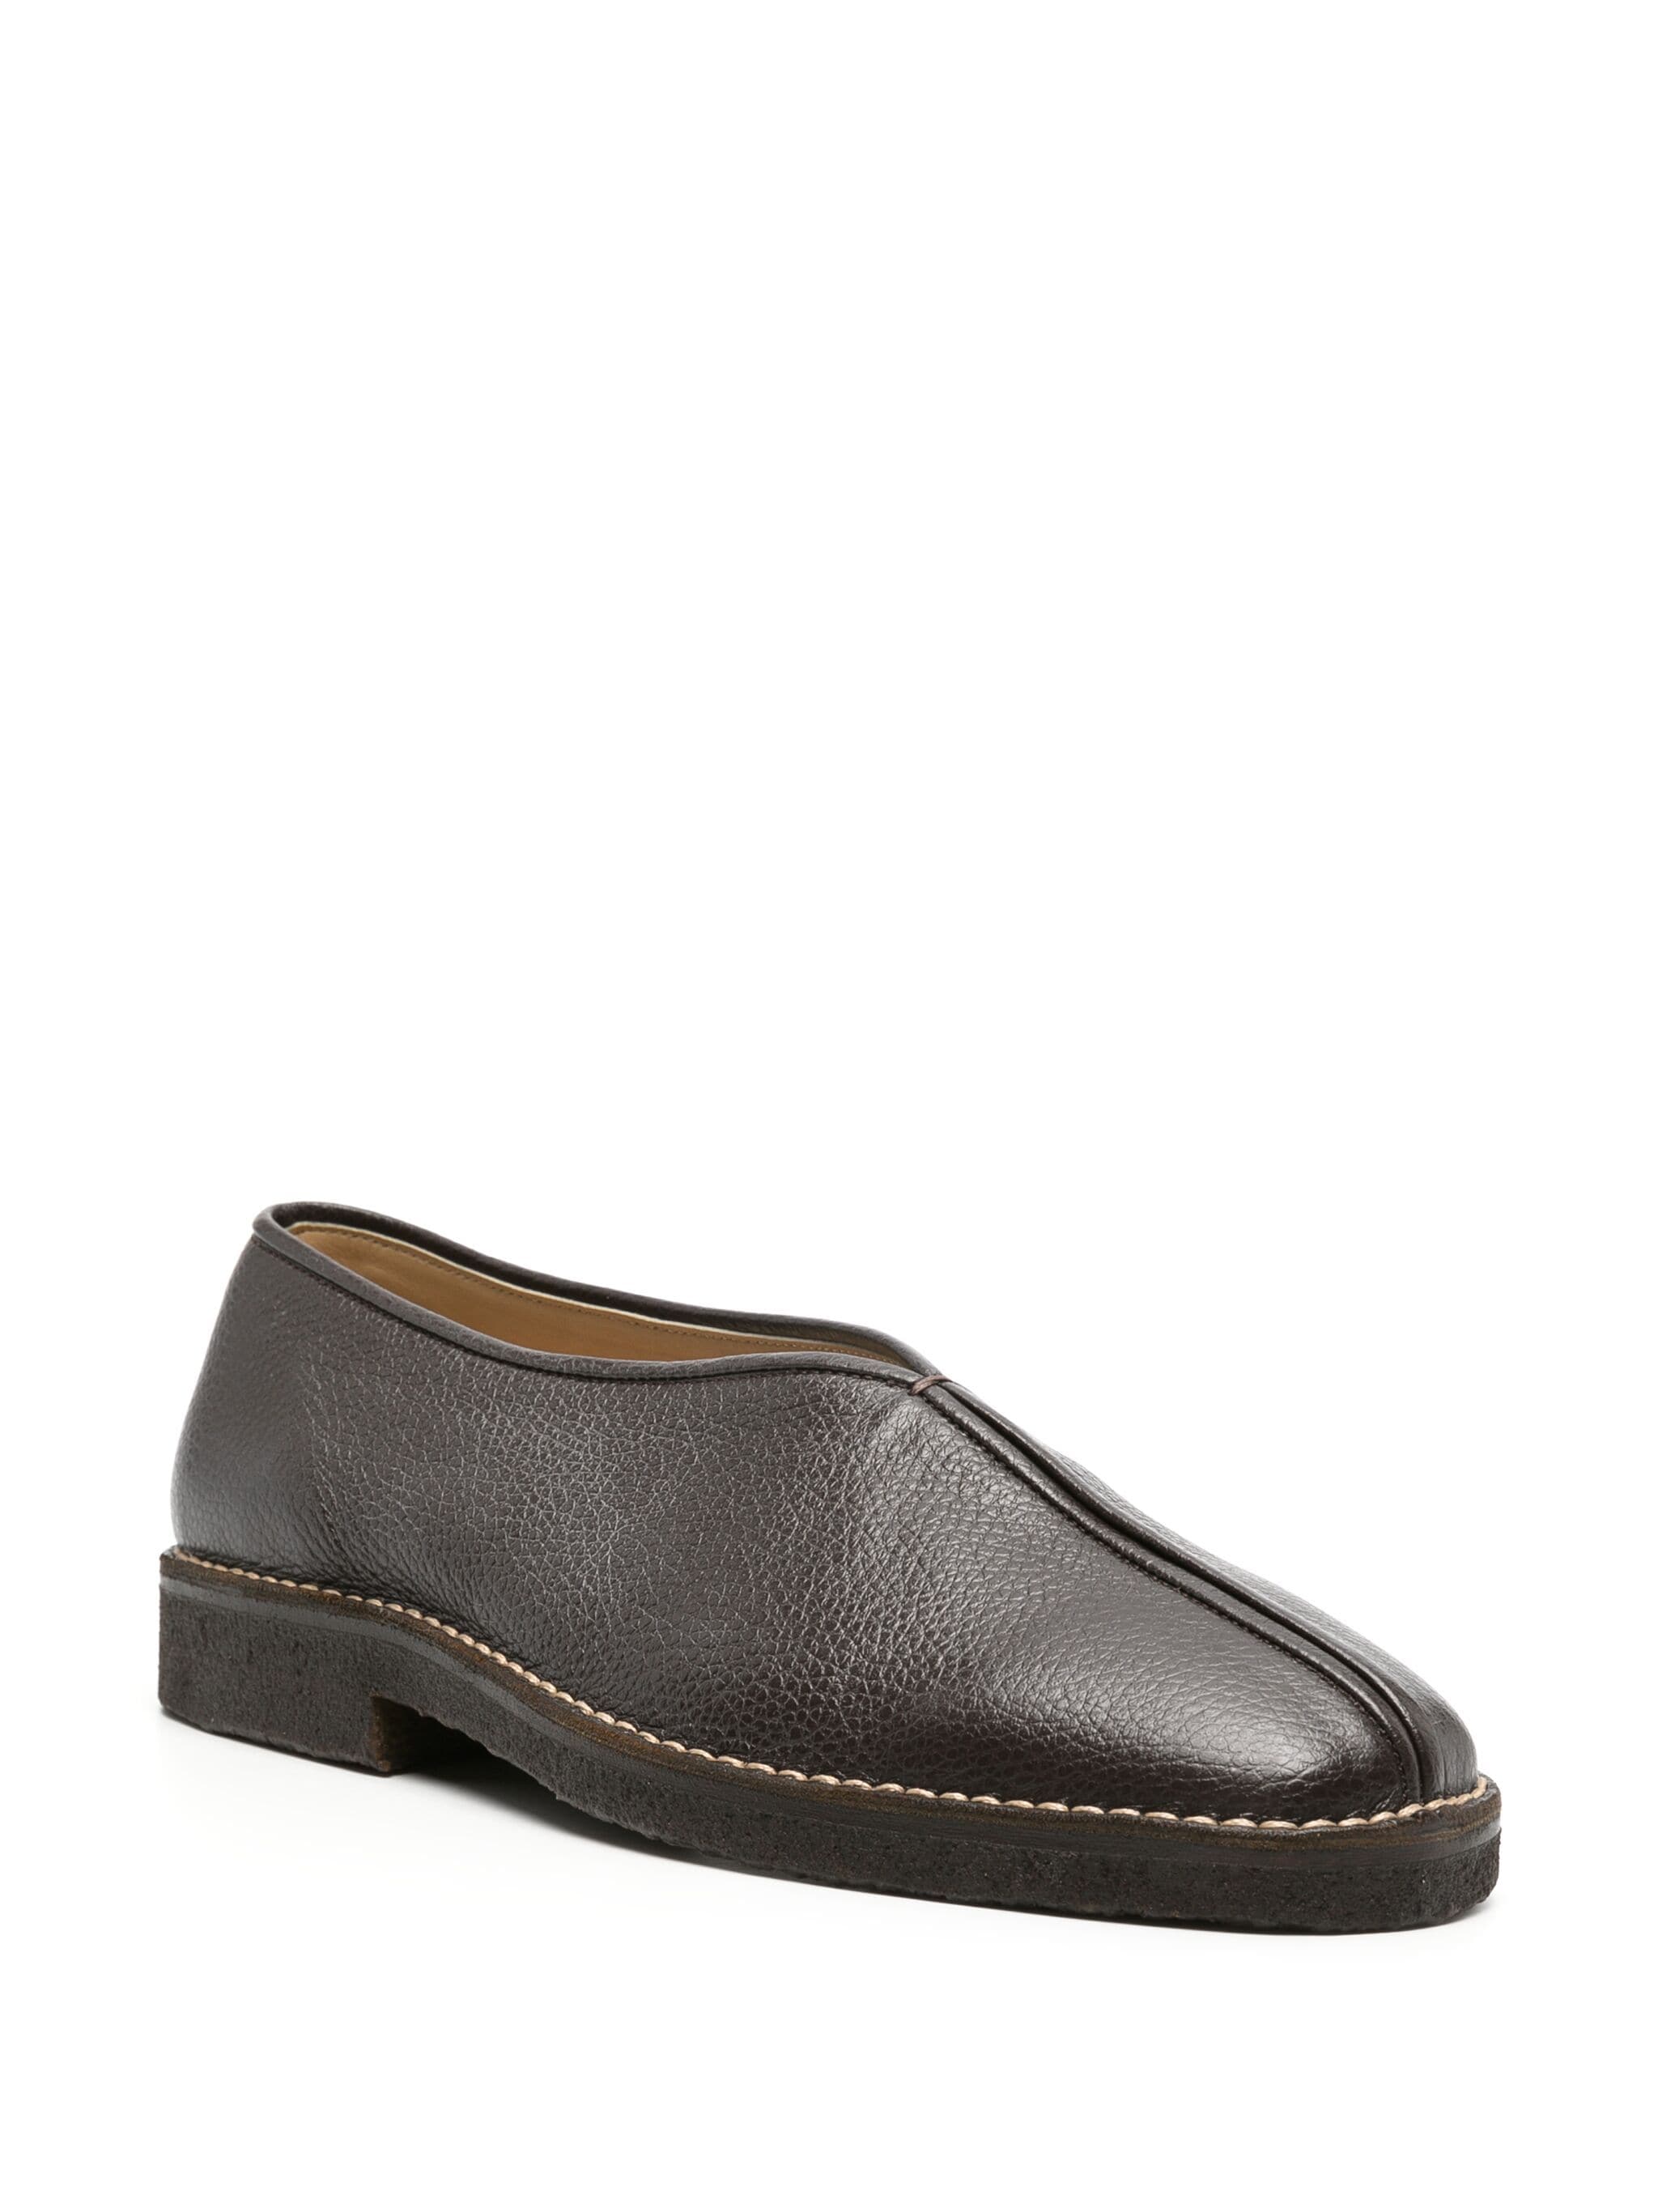 LEMAIRE Men Piped Crepe Slippers